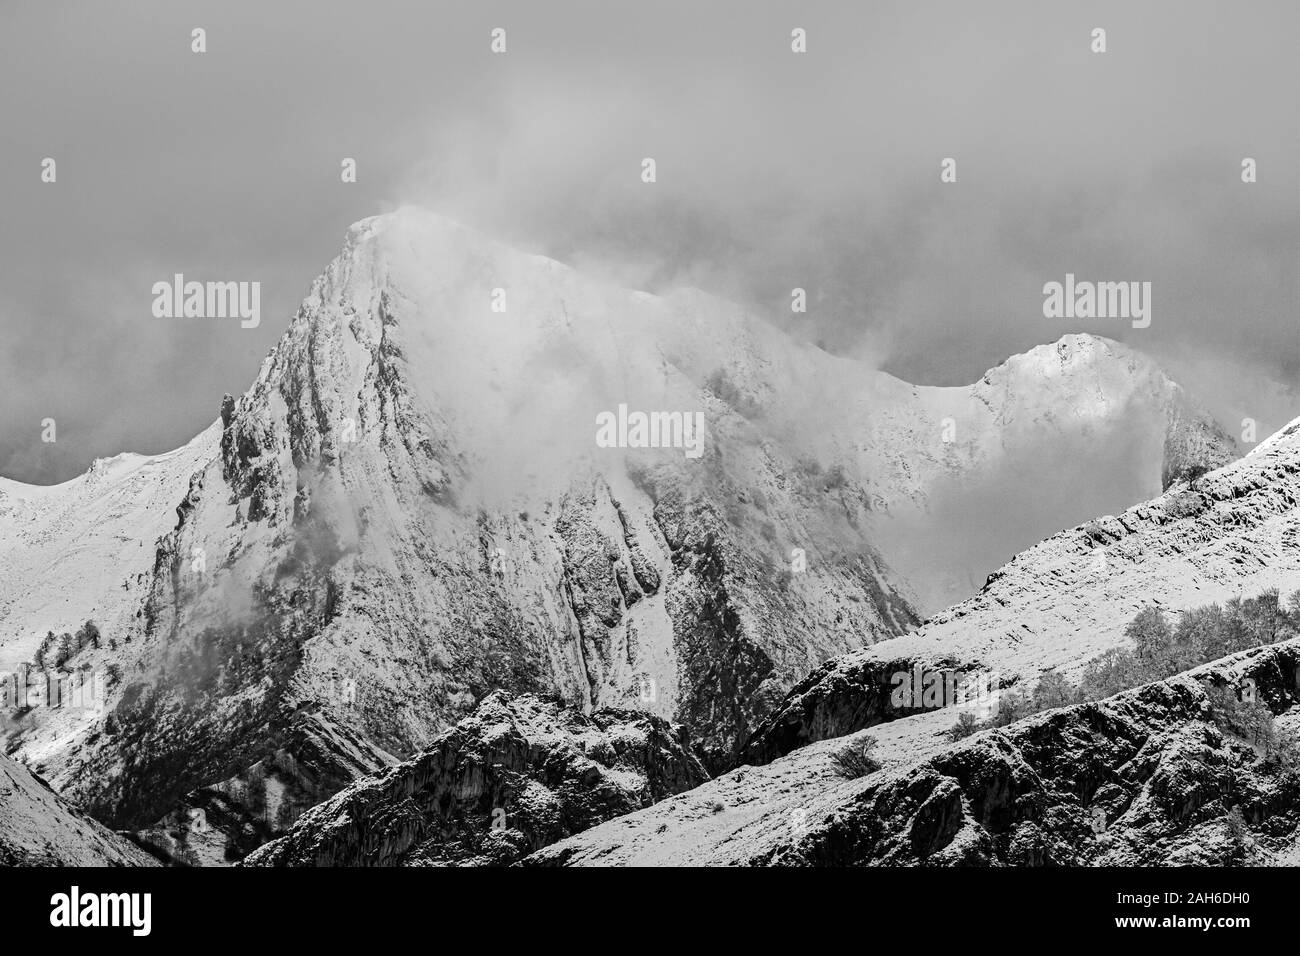 Snowy mountains in northern spain Stock Photo